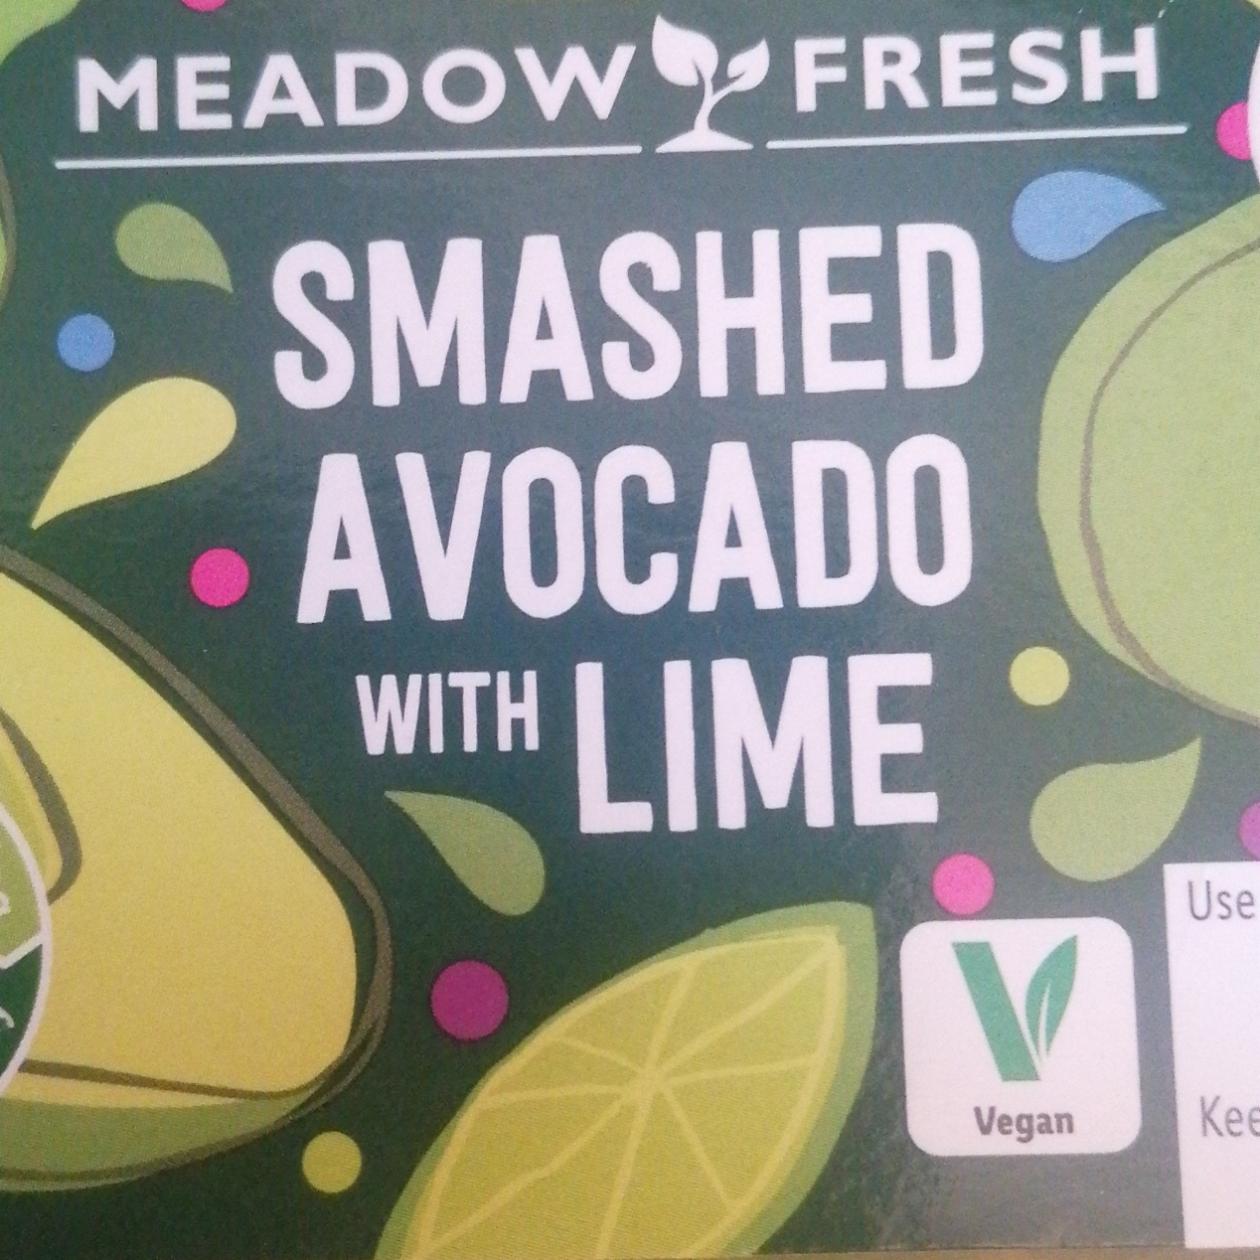 Fotografie - Smashed avocado with lime Meadow Fresh